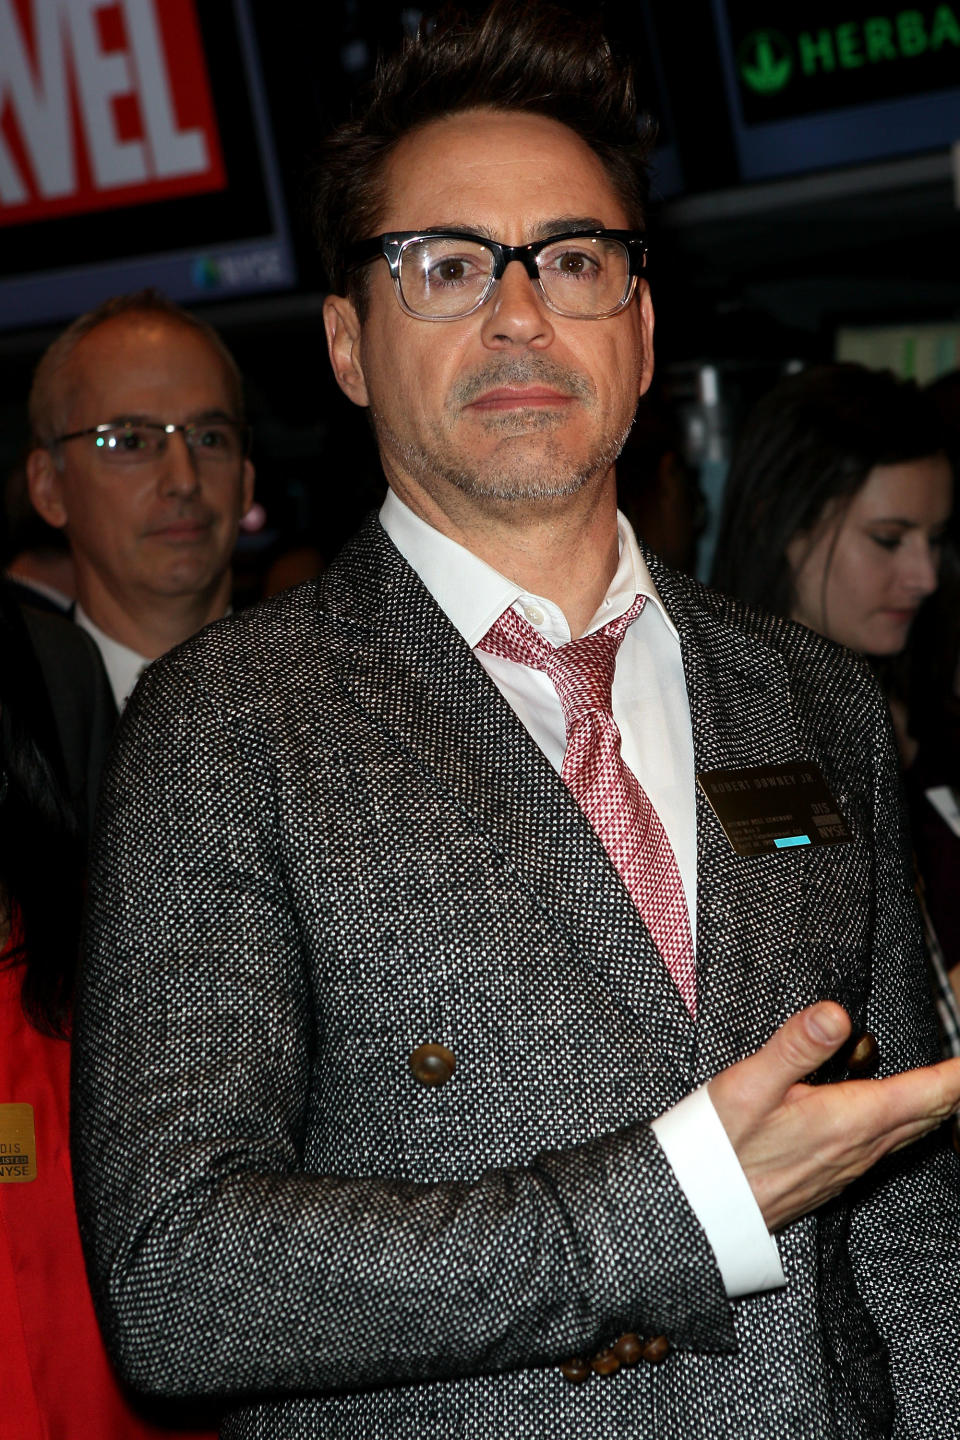 NEW YORK, NY - APRIL 30:  Robert Downey Jr. rings the opening bell at the New York Stock Exchange on April 30, 2013 in New York City.  (Photo by Steve Mack/FilmMagic)